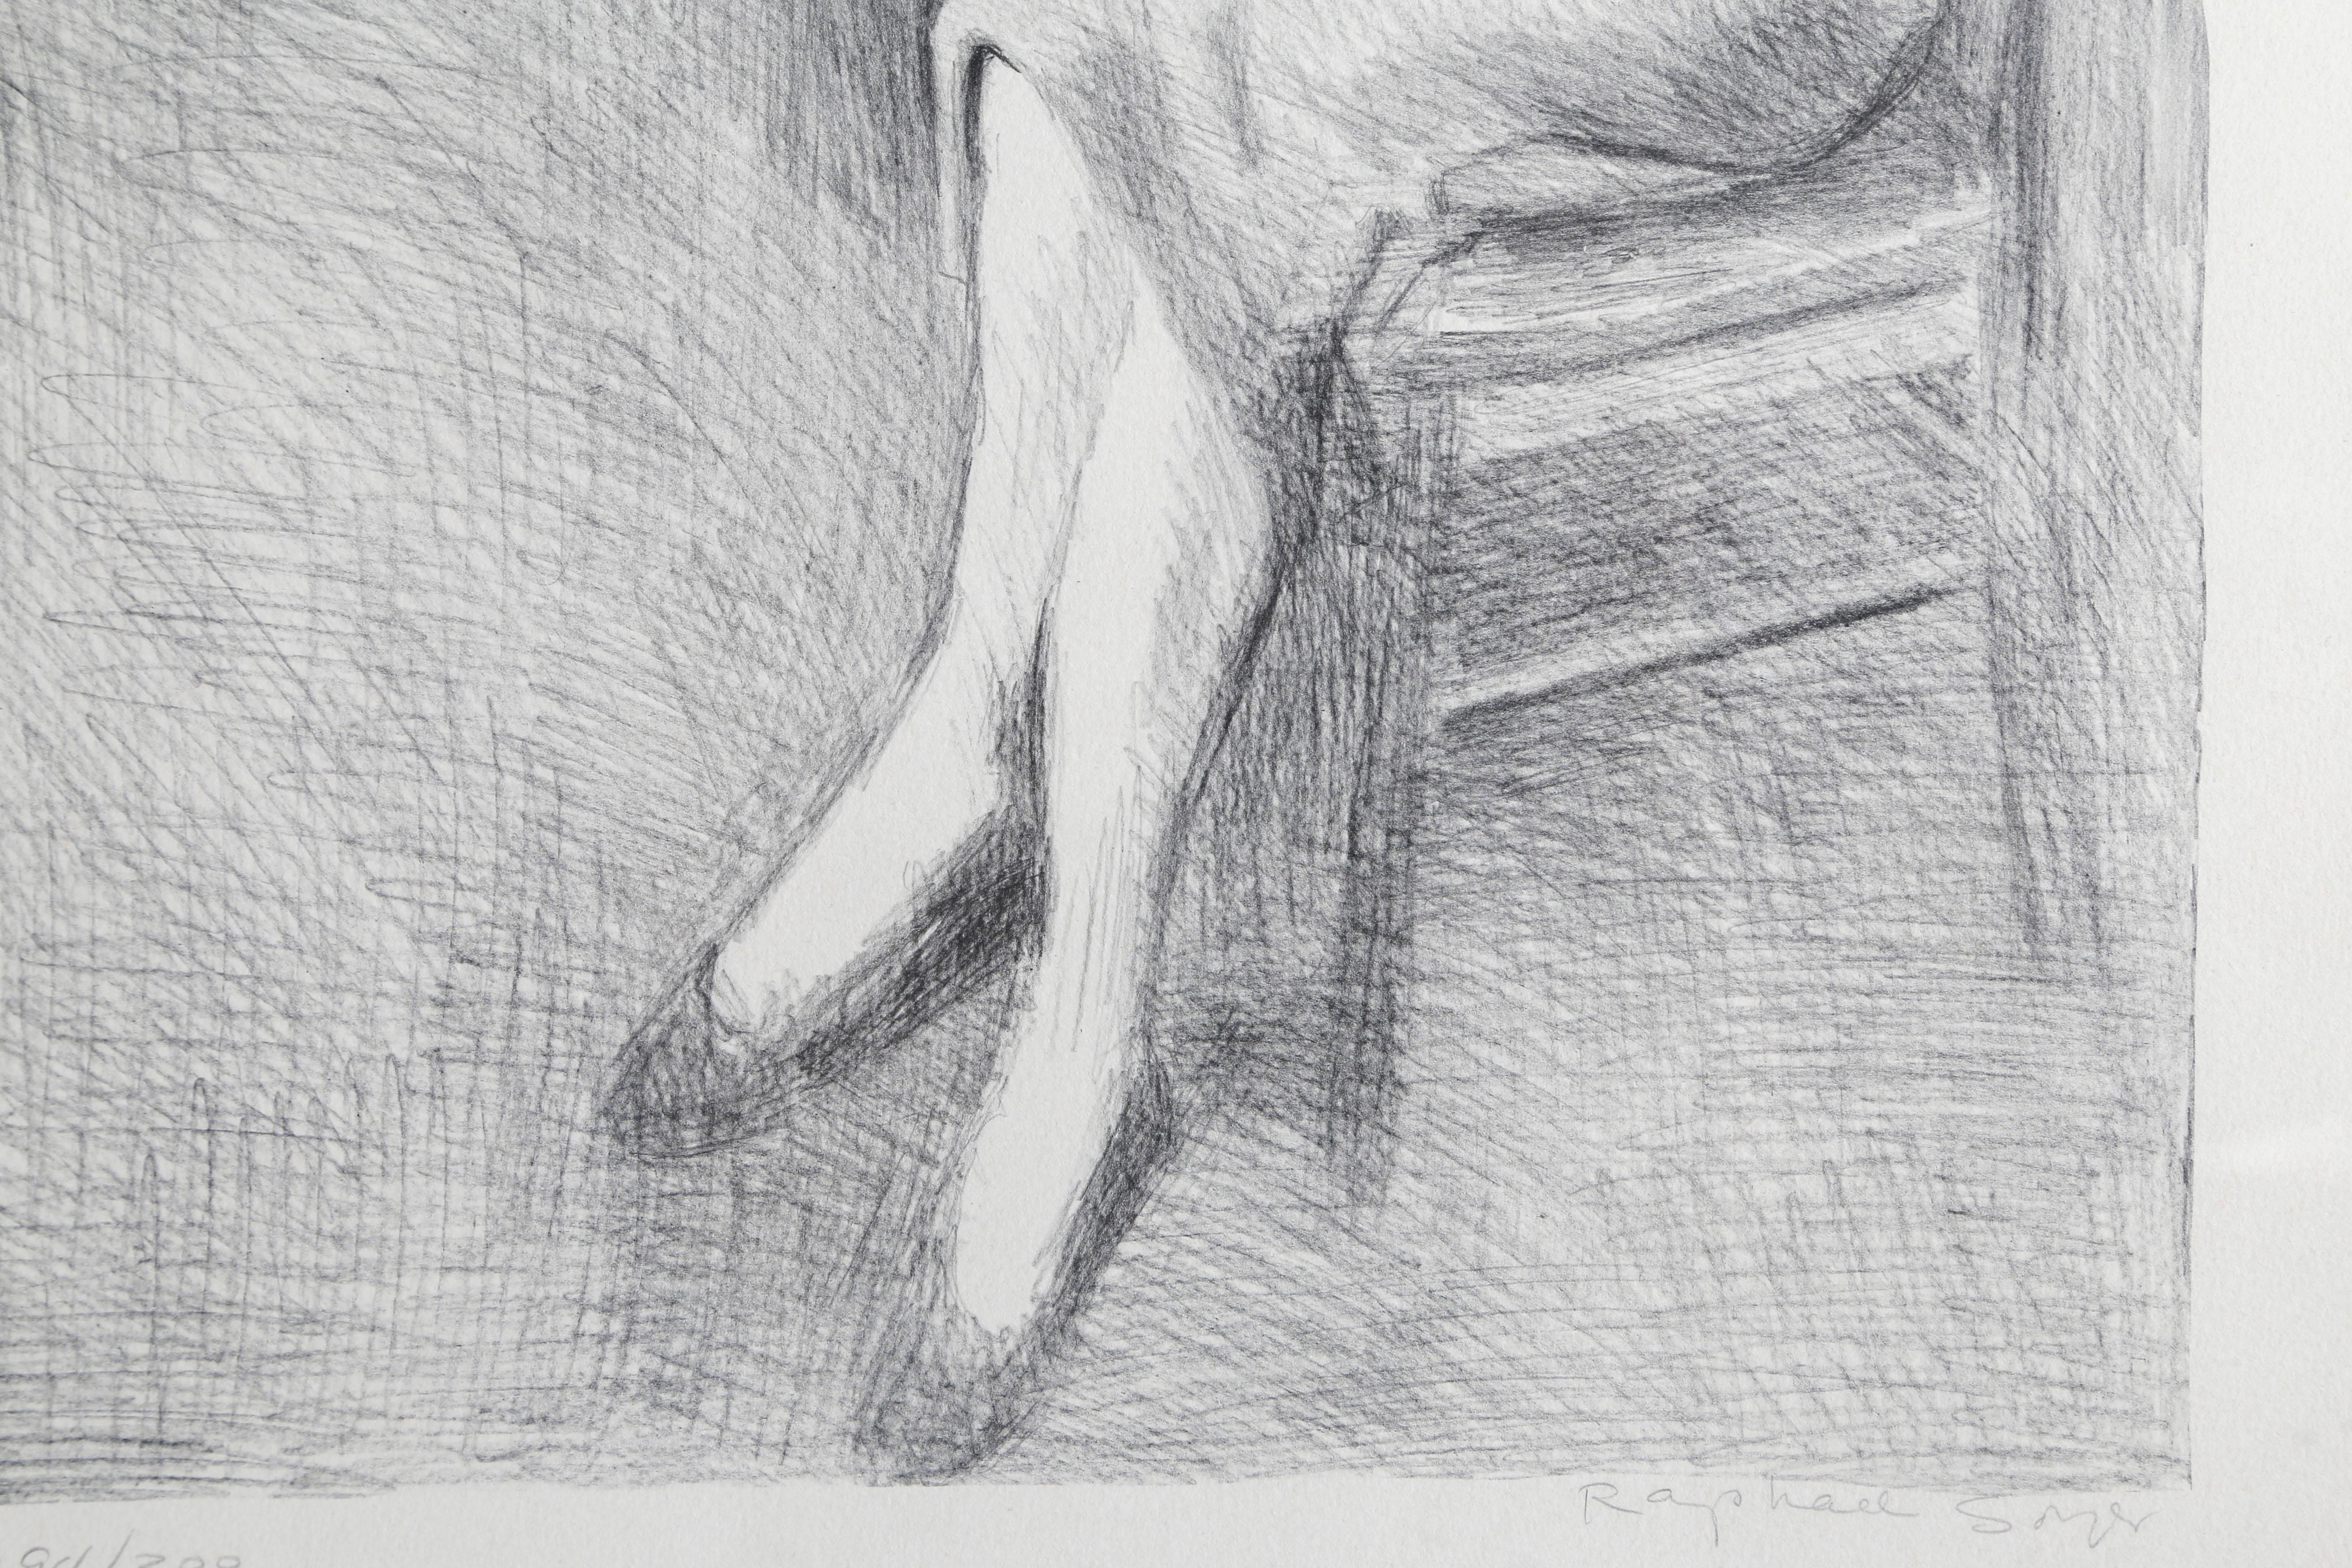 Seated Woman Near A Bed is a limited edition lithograph by the artist Raphael Soyer - Russian/American Social Realism Painter. Printed using traditional hand lithography techniques on archival Arches printmaking paper. A realistic image depicting a